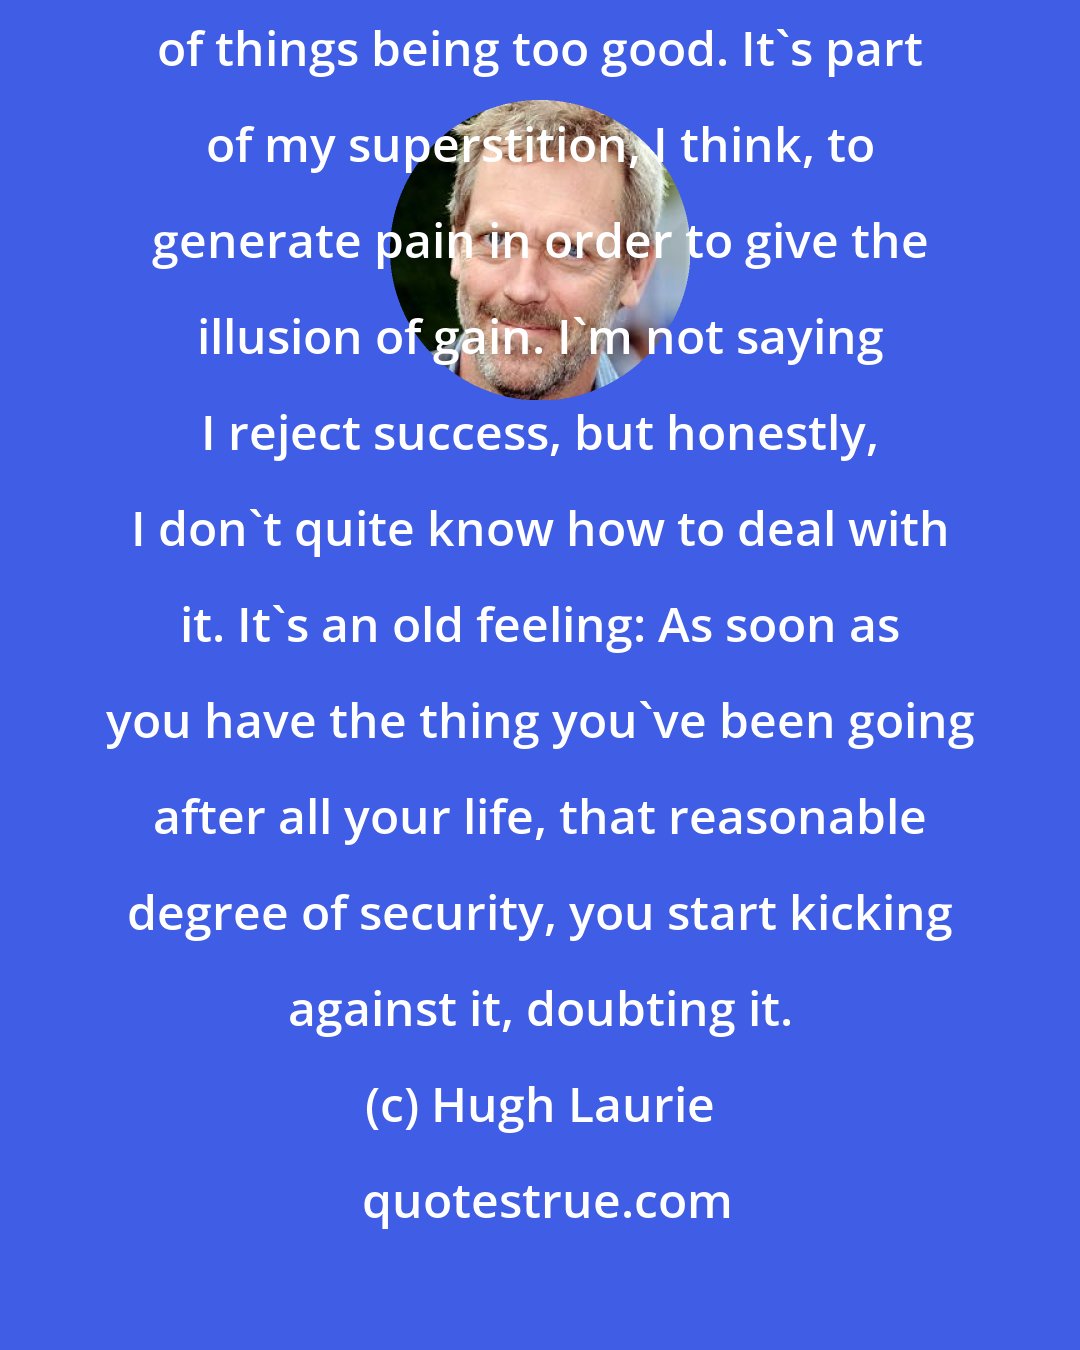 Hugh Laurie: Success on a cosmic level completely eludes me. I'm deeply suspicious of things being too good. It's part of my superstition, I think, to generate pain in order to give the illusion of gain. I'm not saying I reject success, but honestly, I don't quite know how to deal with it. It's an old feeling: As soon as you have the thing you've been going after all your life, that reasonable degree of security, you start kicking against it, doubting it.